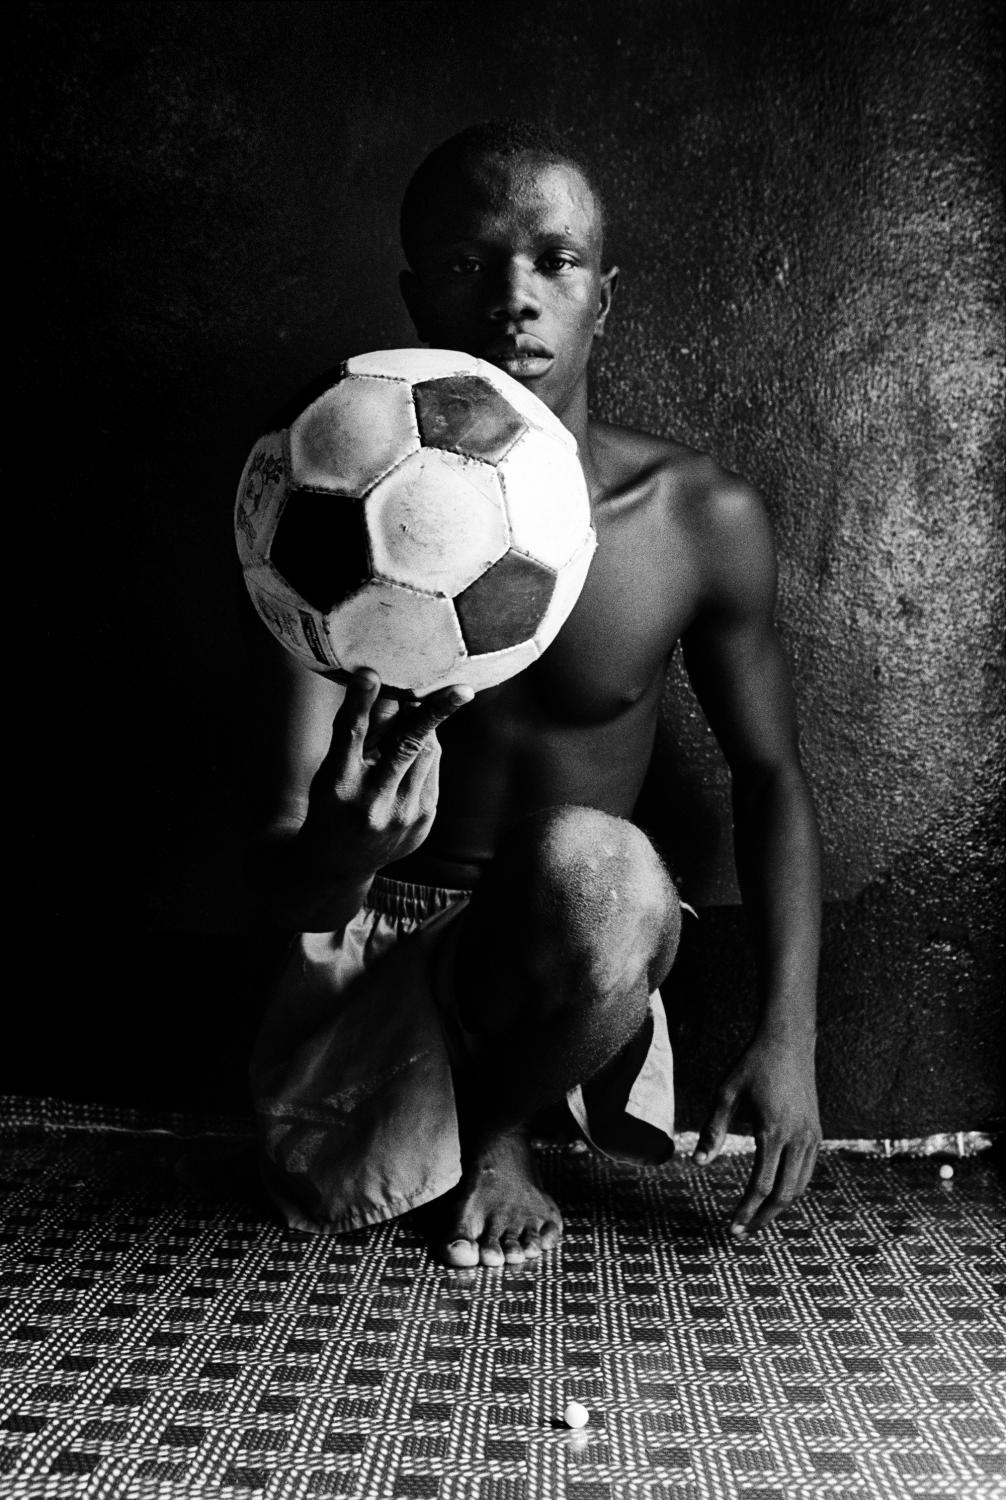 One Goal - SIERRA LEONE Freetown
One of the amputee soccer players...